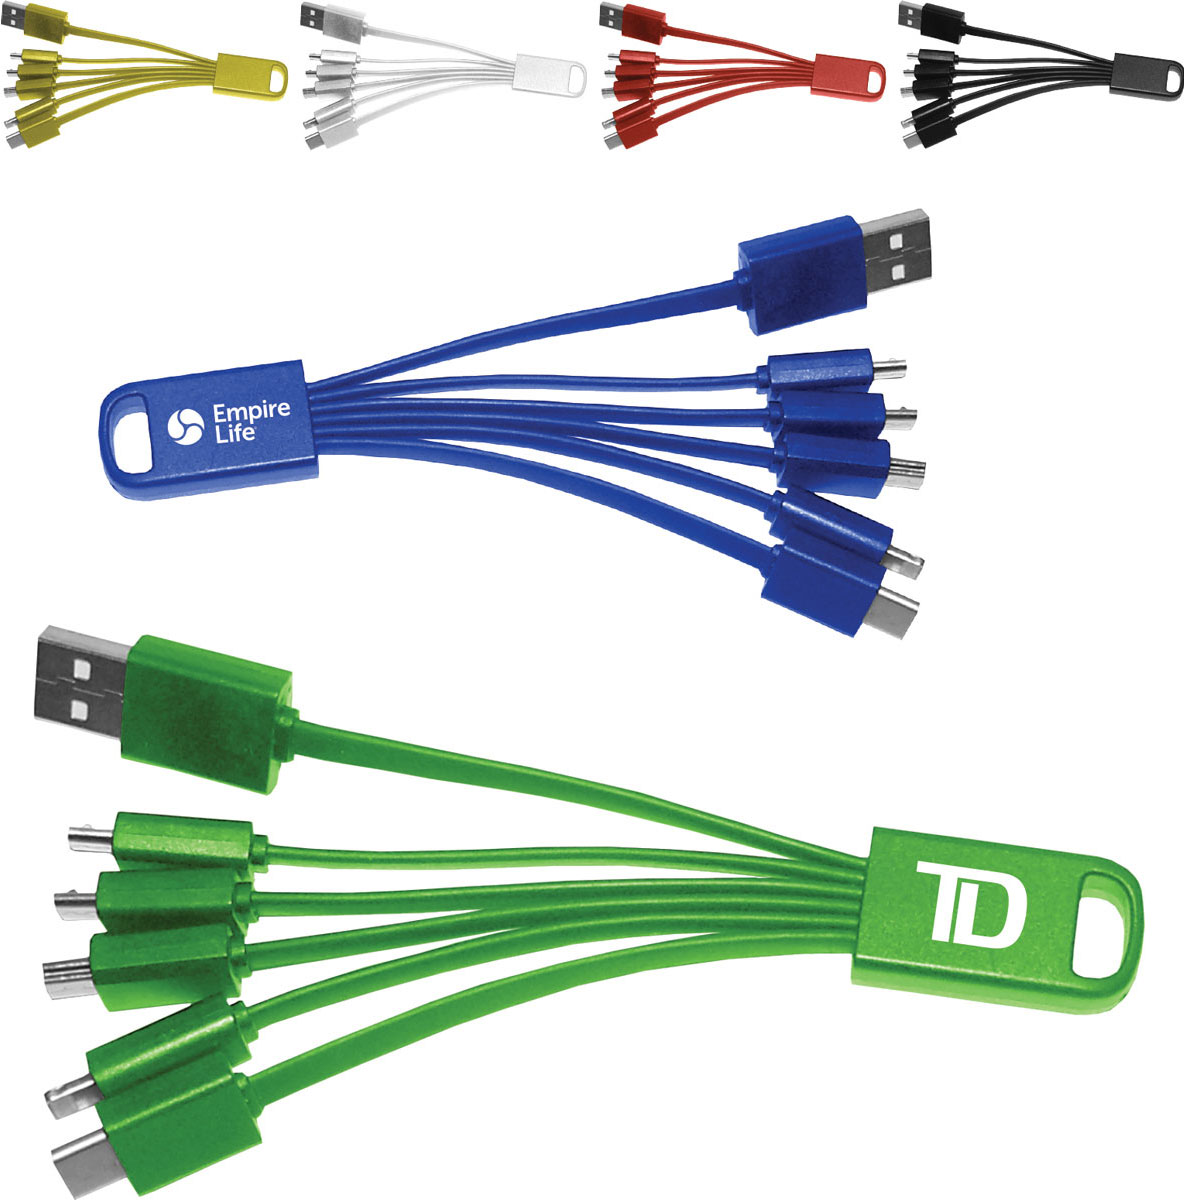 6 in 1 USB Adapter Charging Cable